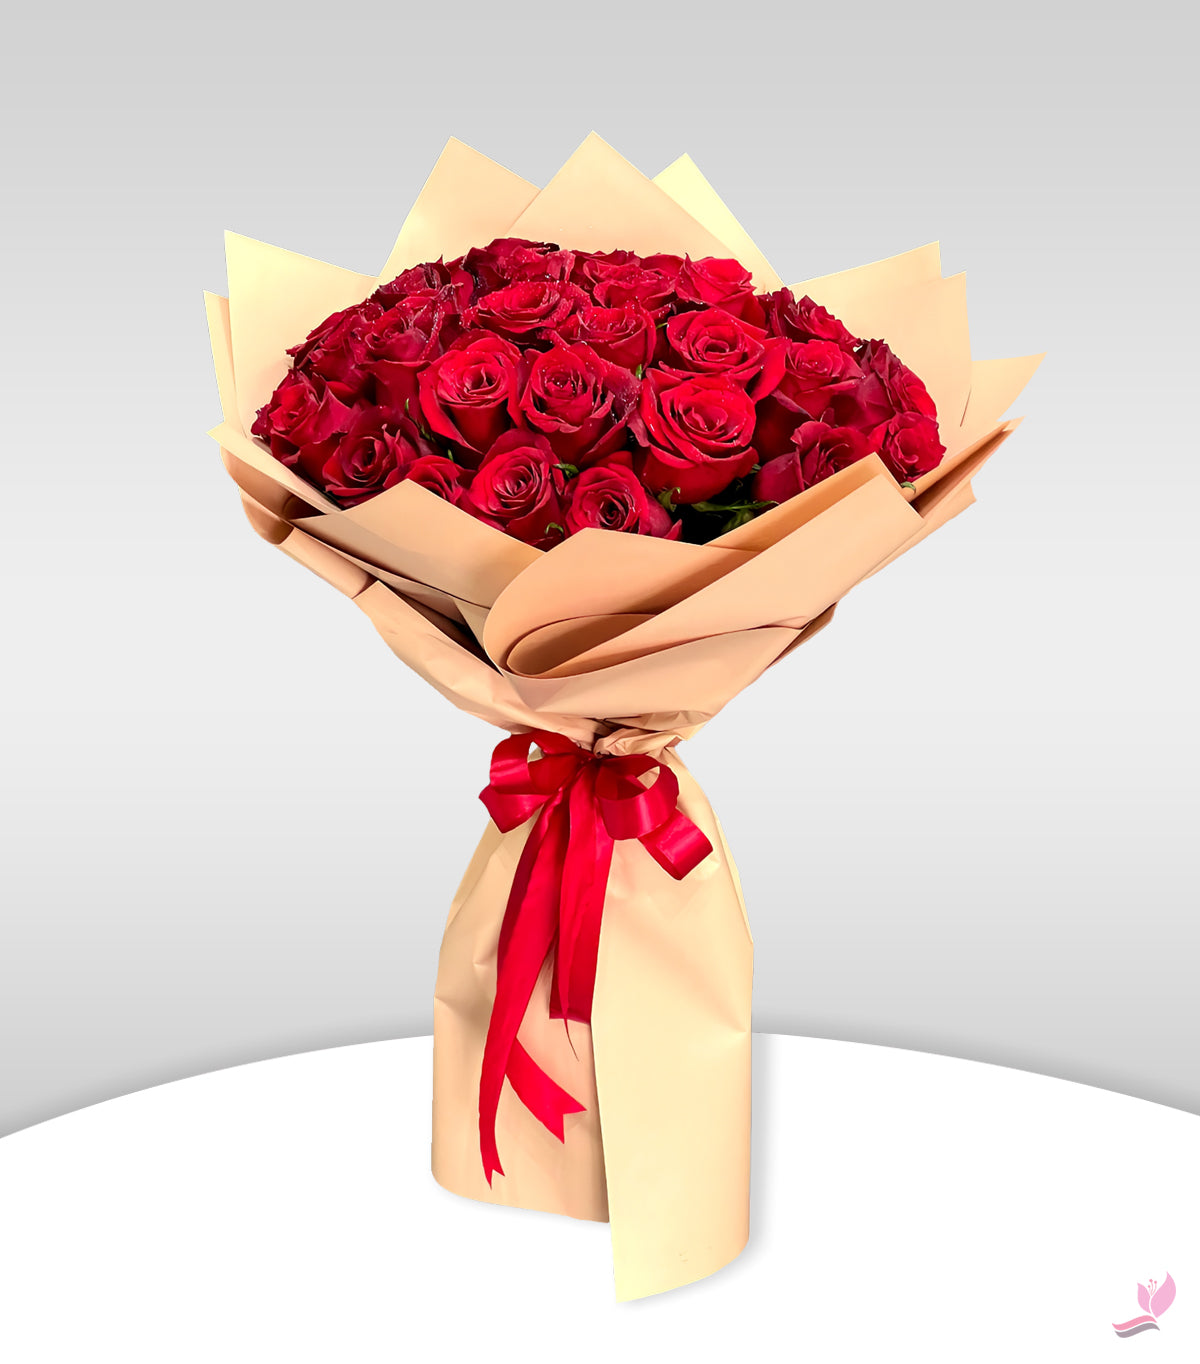 Red Hot 30 - Fresh Cut Flowers - Single Stem Bouquets - 30 Red Roses